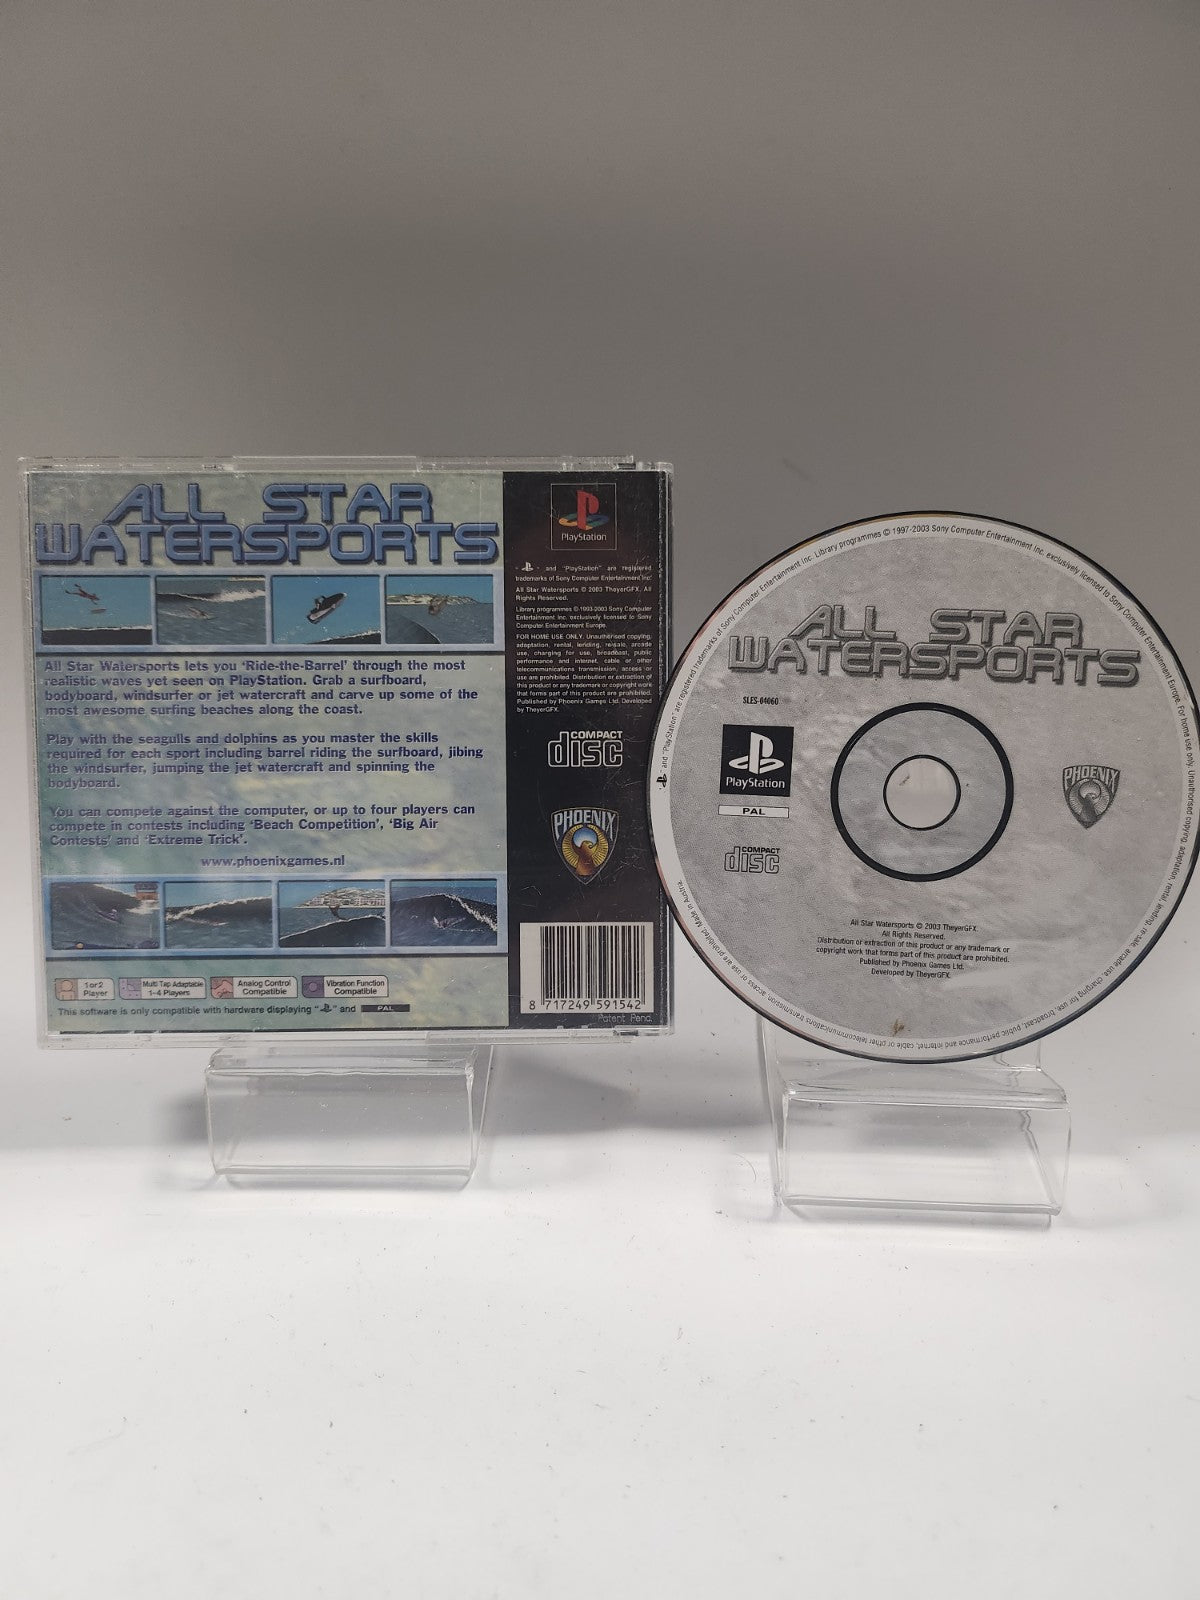 All Star Watersports (only backcover) PlayStation 1